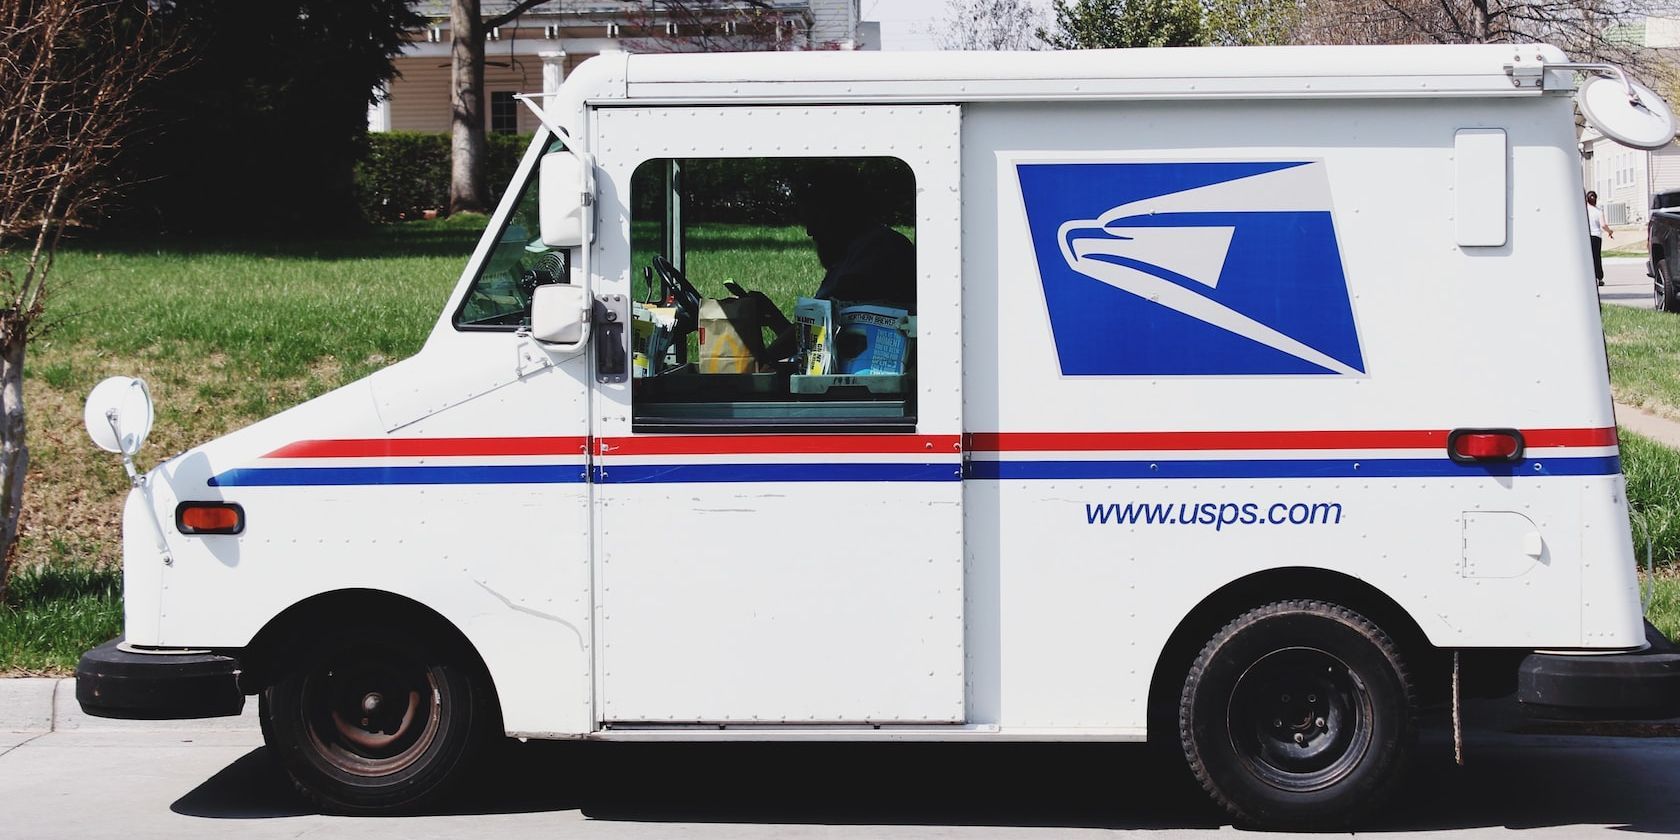 A USPS Van Standing on a Road